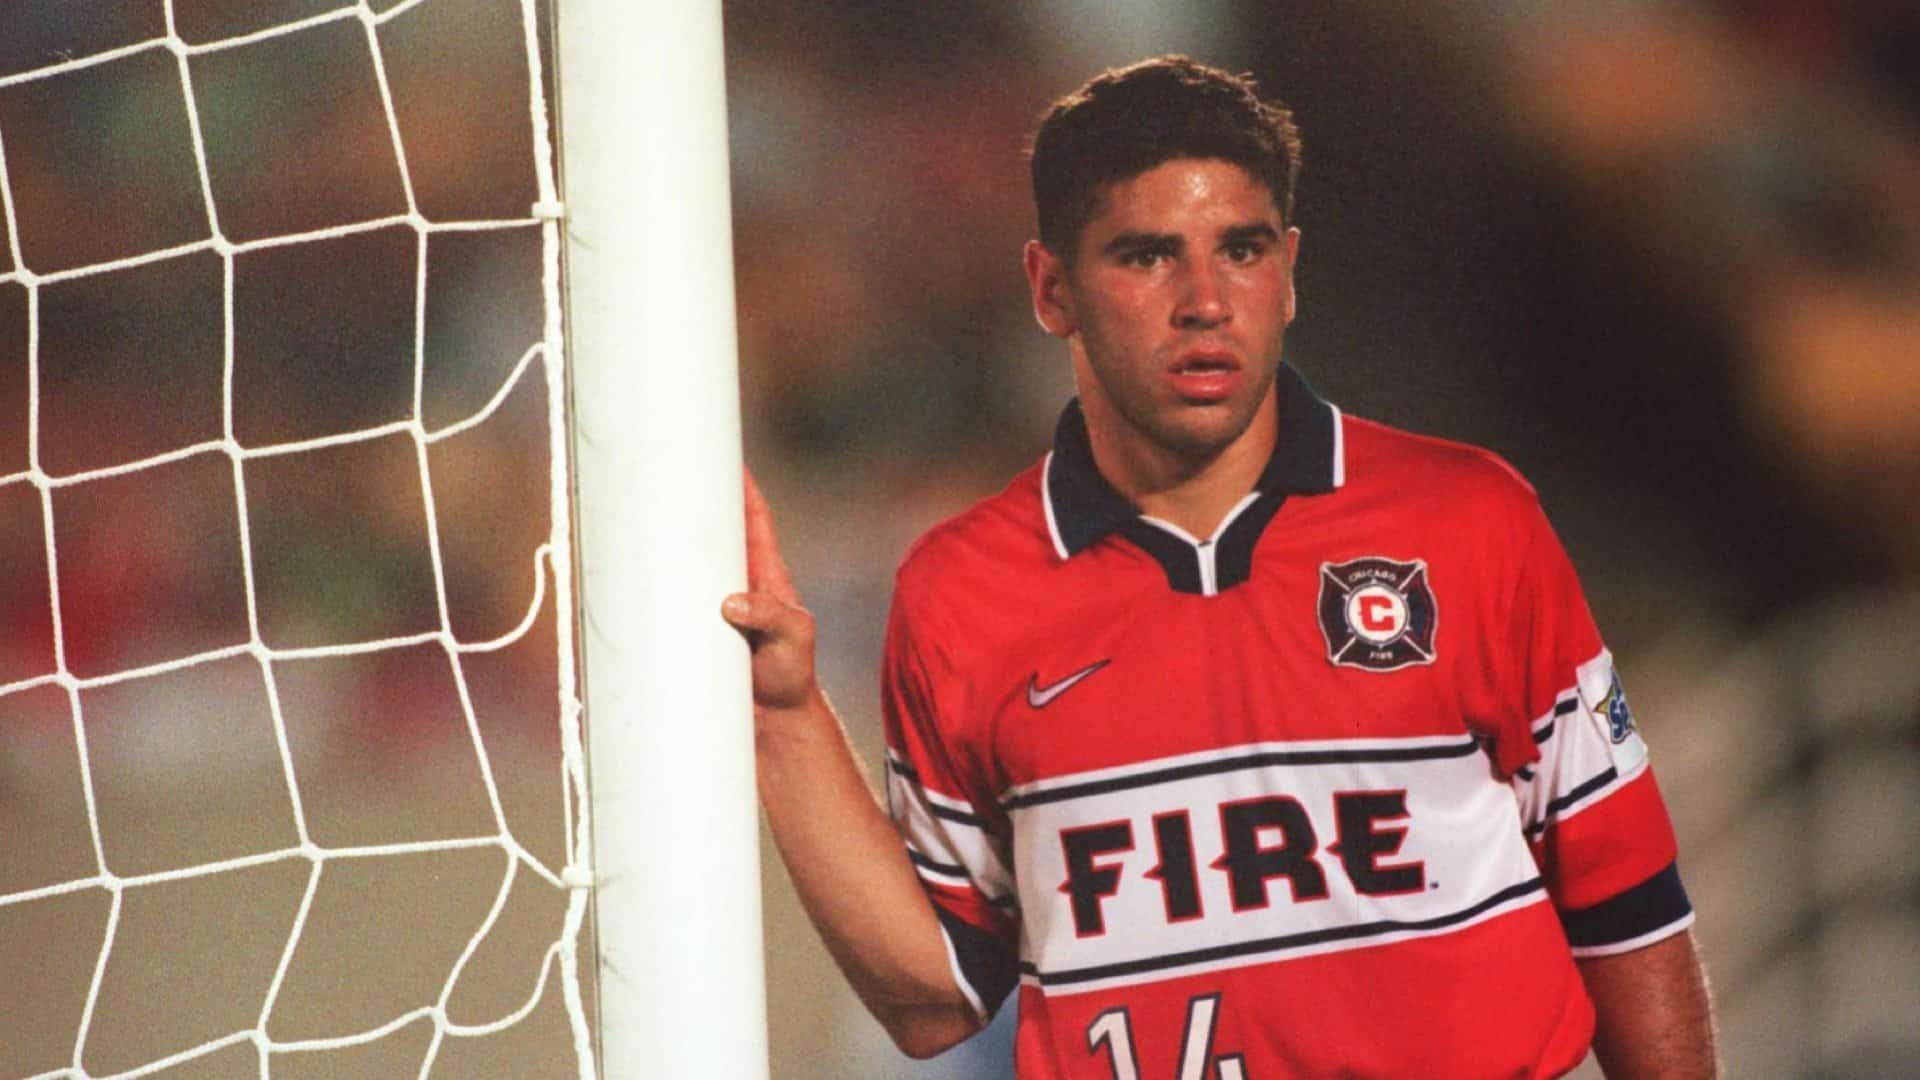 Chris Armas, Leeds' new assistant coach, leaning against a goalpost while playing for Chicago Fire against Dallas Burn in 1999. He's wearing a really cool dark orange jersey with 'FIRE' written across it in a white band